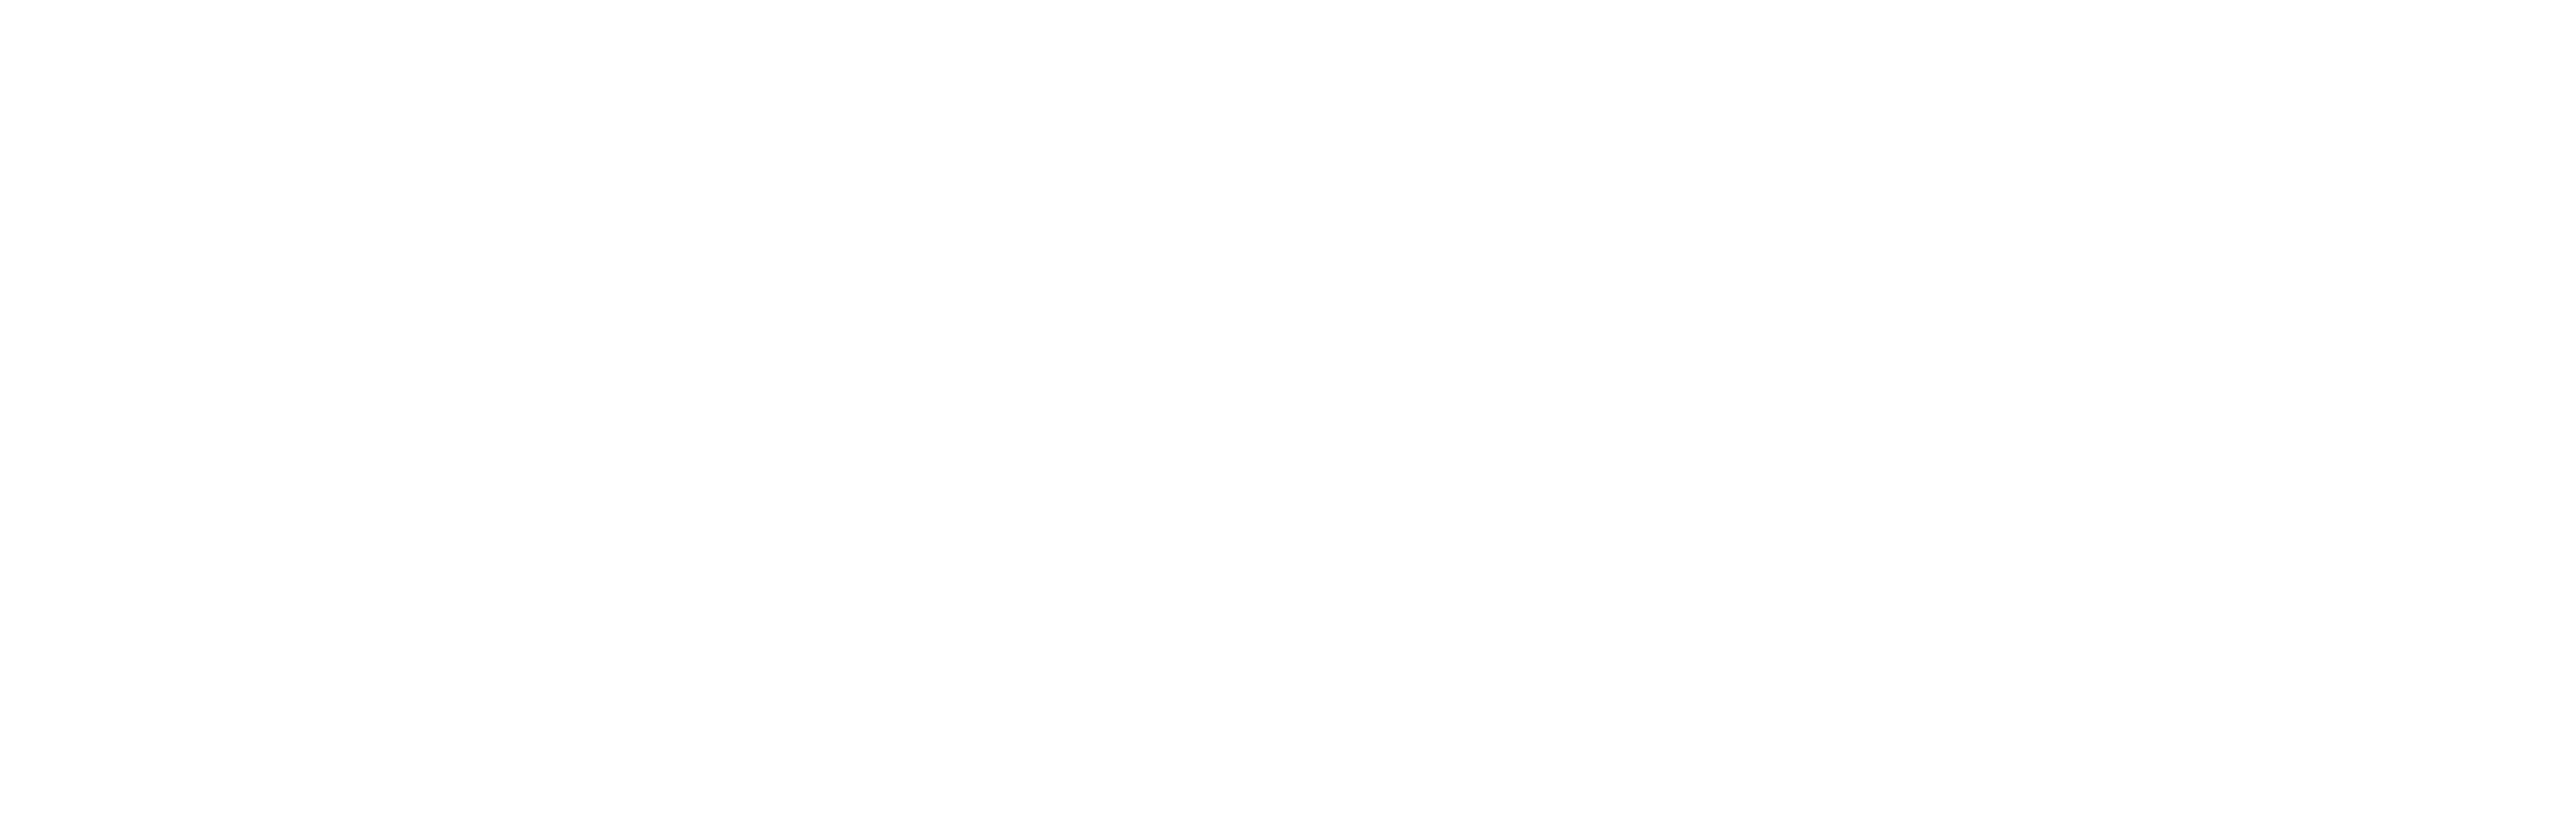 The Drug and Alcohol Service - Croydon logo in white